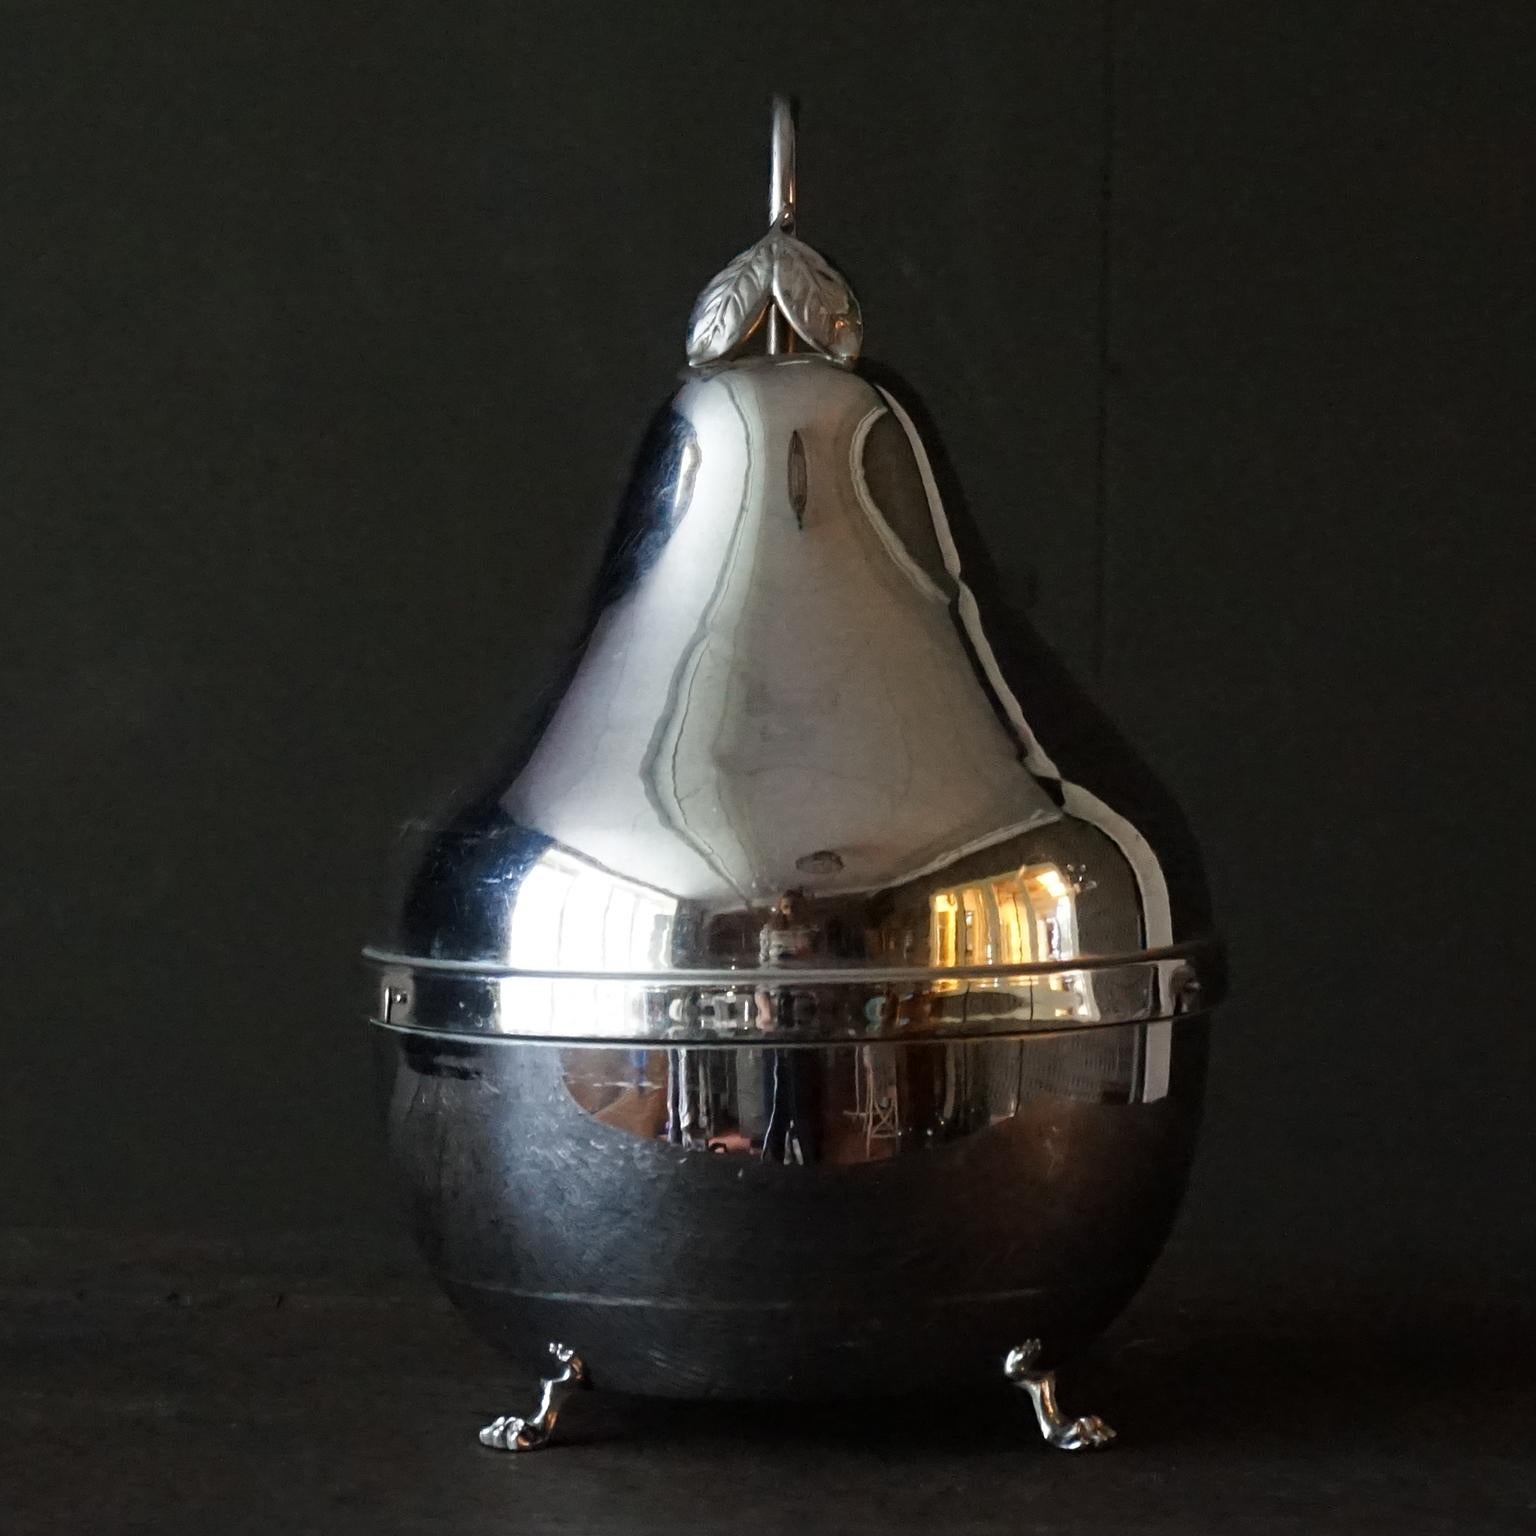 Pretty 1940s Belgian Mid Century Modern pear shaped stainless steel liquor cellar with a CVC Belgium Art-Deco uranium (or vaseline) glass carafe and 6 coloured glasses inside
The holder is removable so in the bottom half of the pear you could easily